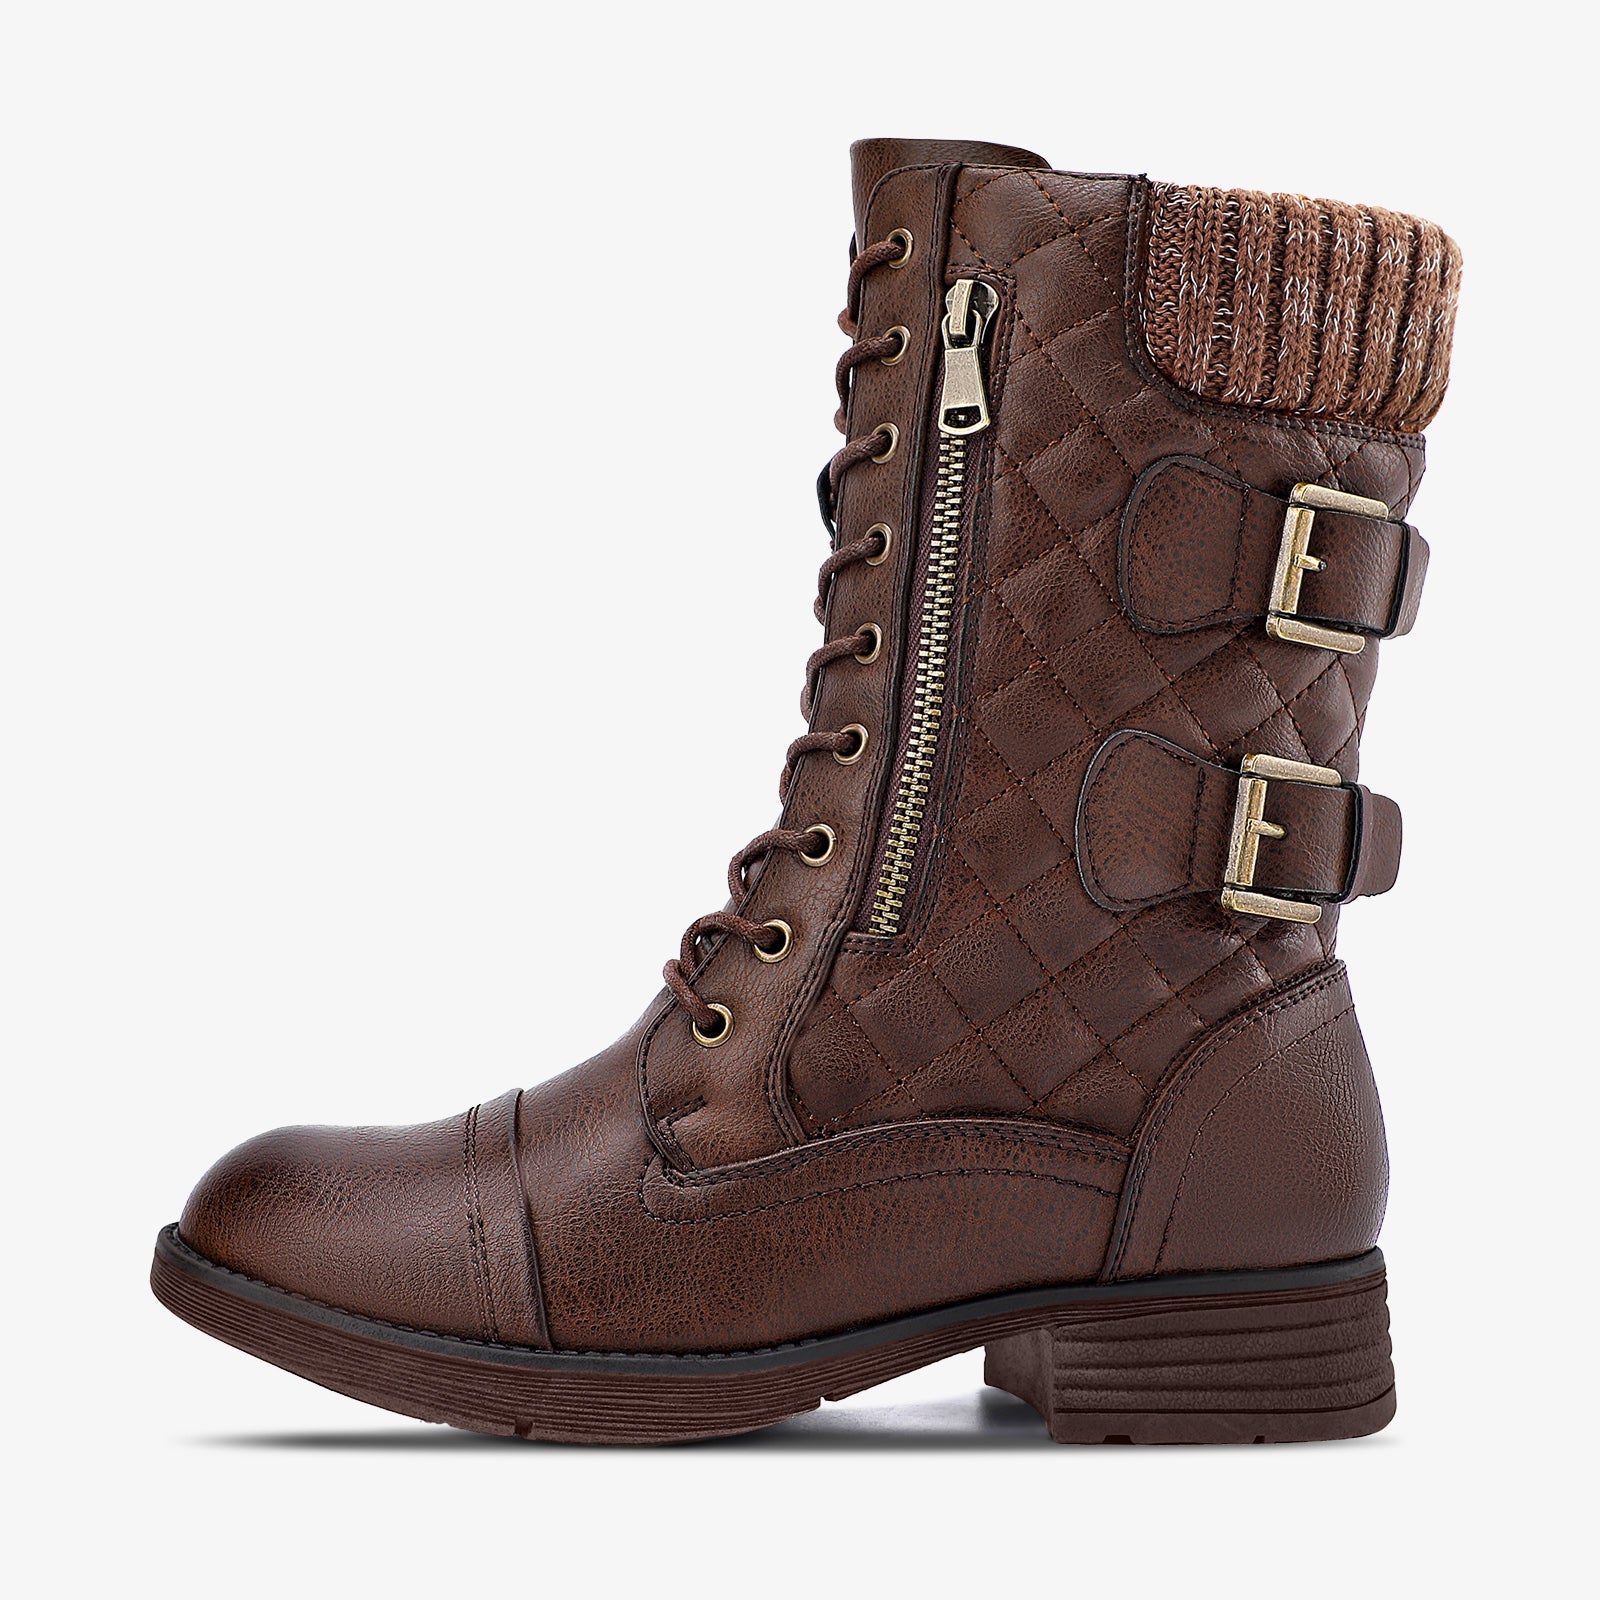 stq-women-combat-boots-product-view-brown